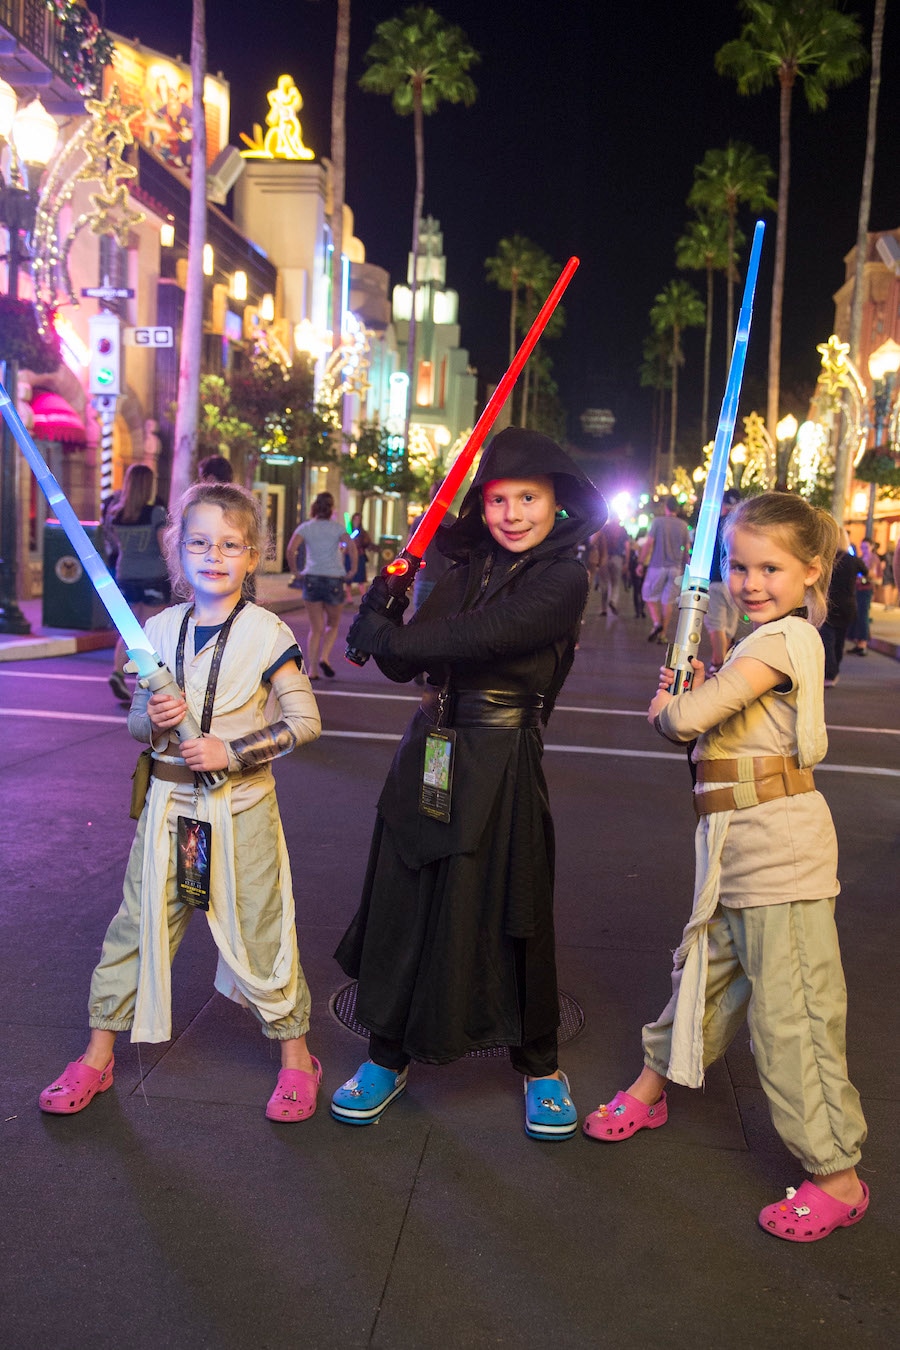 Guests Celebrate The Opening Of 'Star Wars: The Force Awakens' at Disney's Hollywood Studios